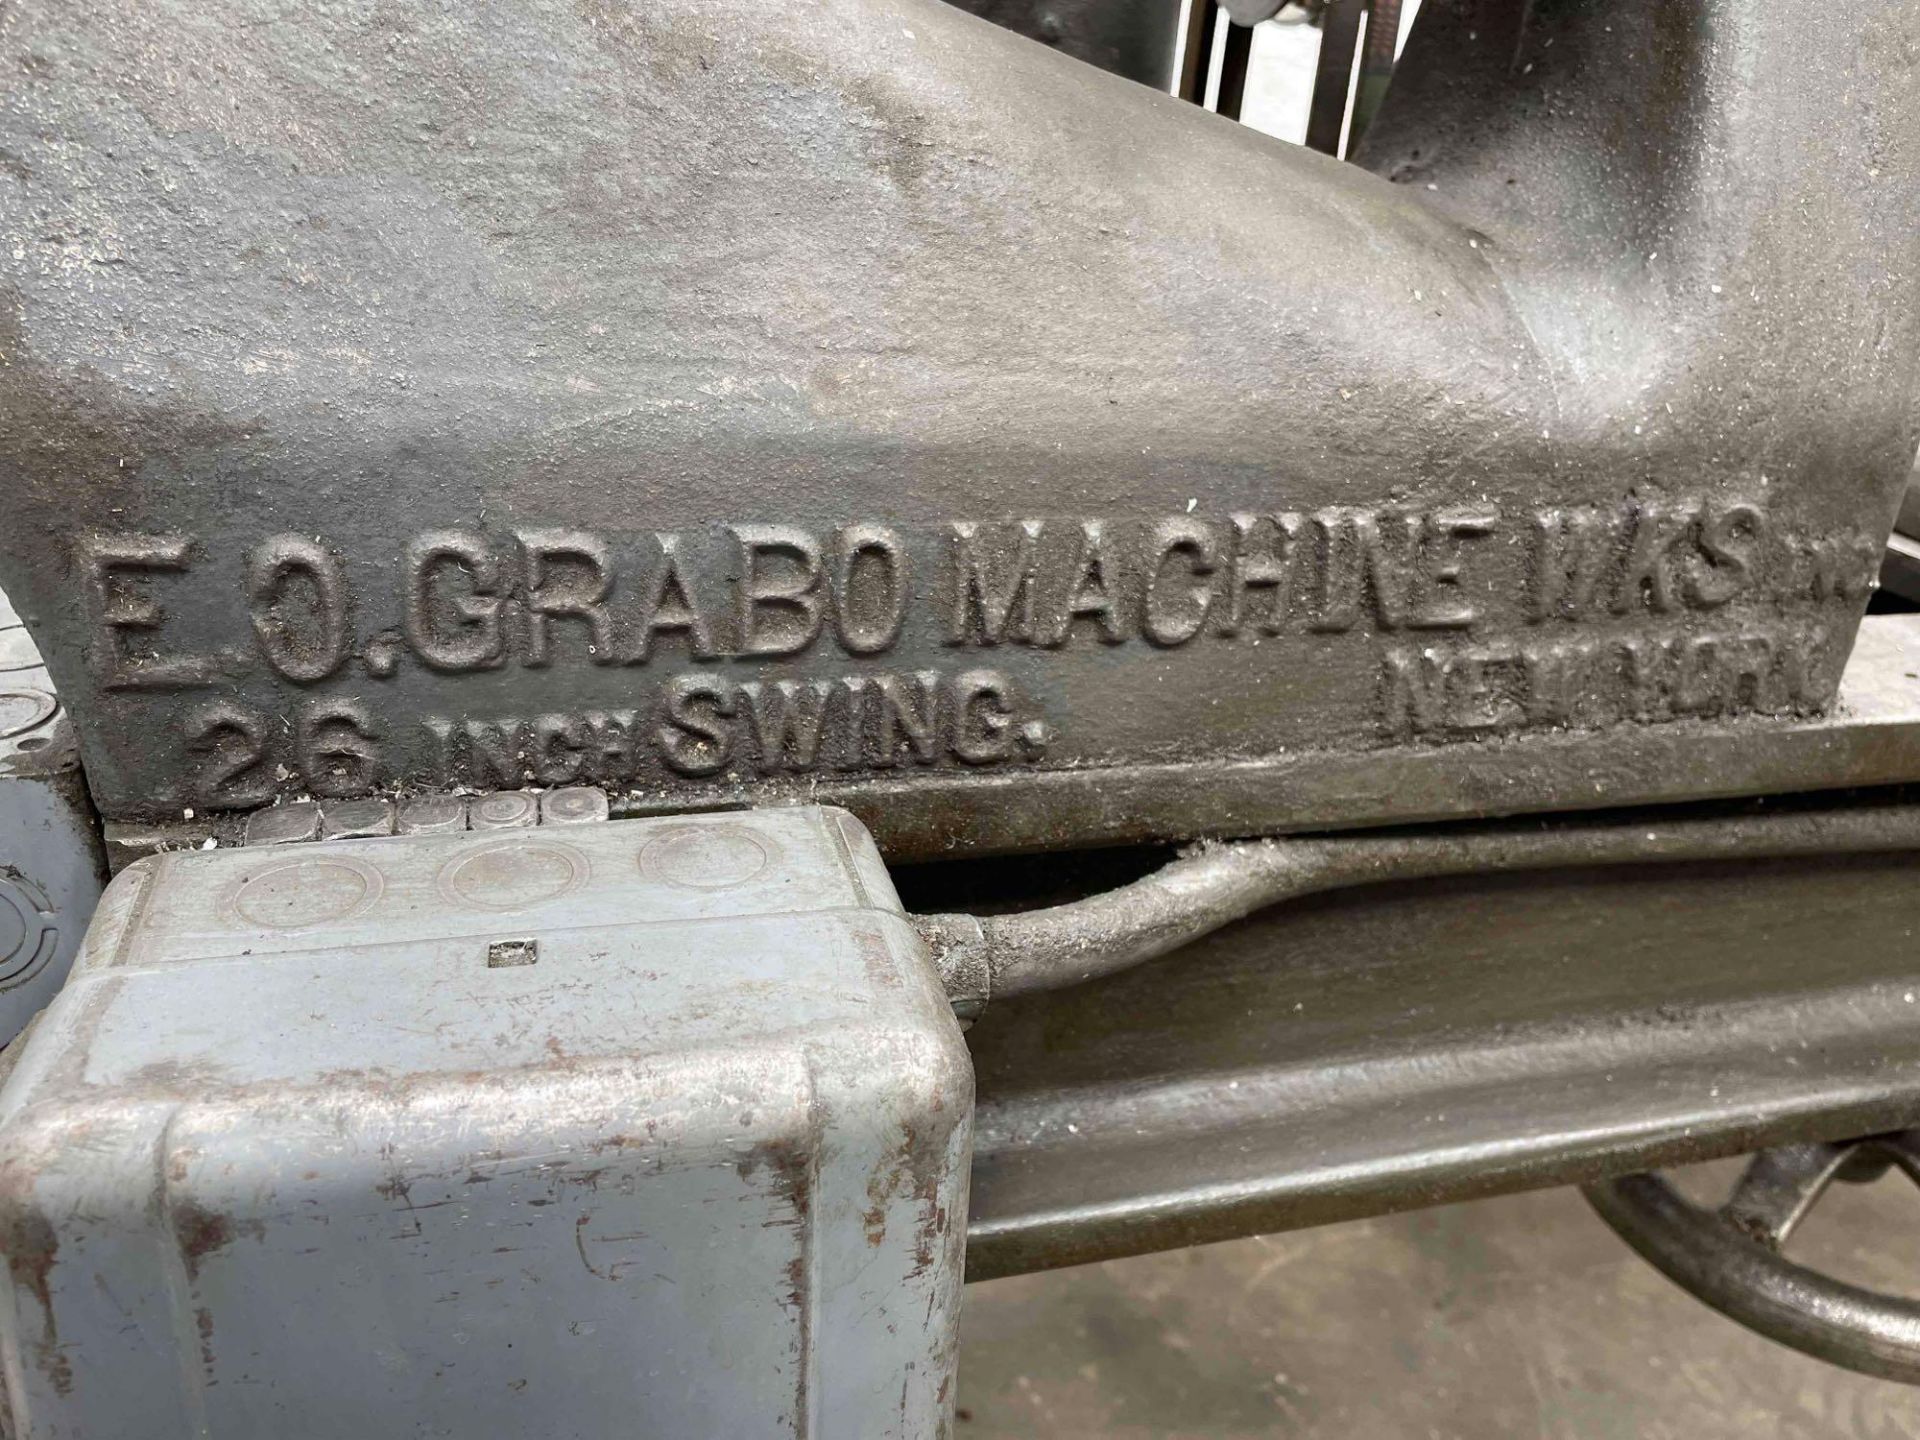 E.O.Grabo Machine Wks Spinning Lathe, 26 in Swing, 24 in Between Centers, 3 HP, 1 Phase, 208V $50 Ba - Image 17 of 18